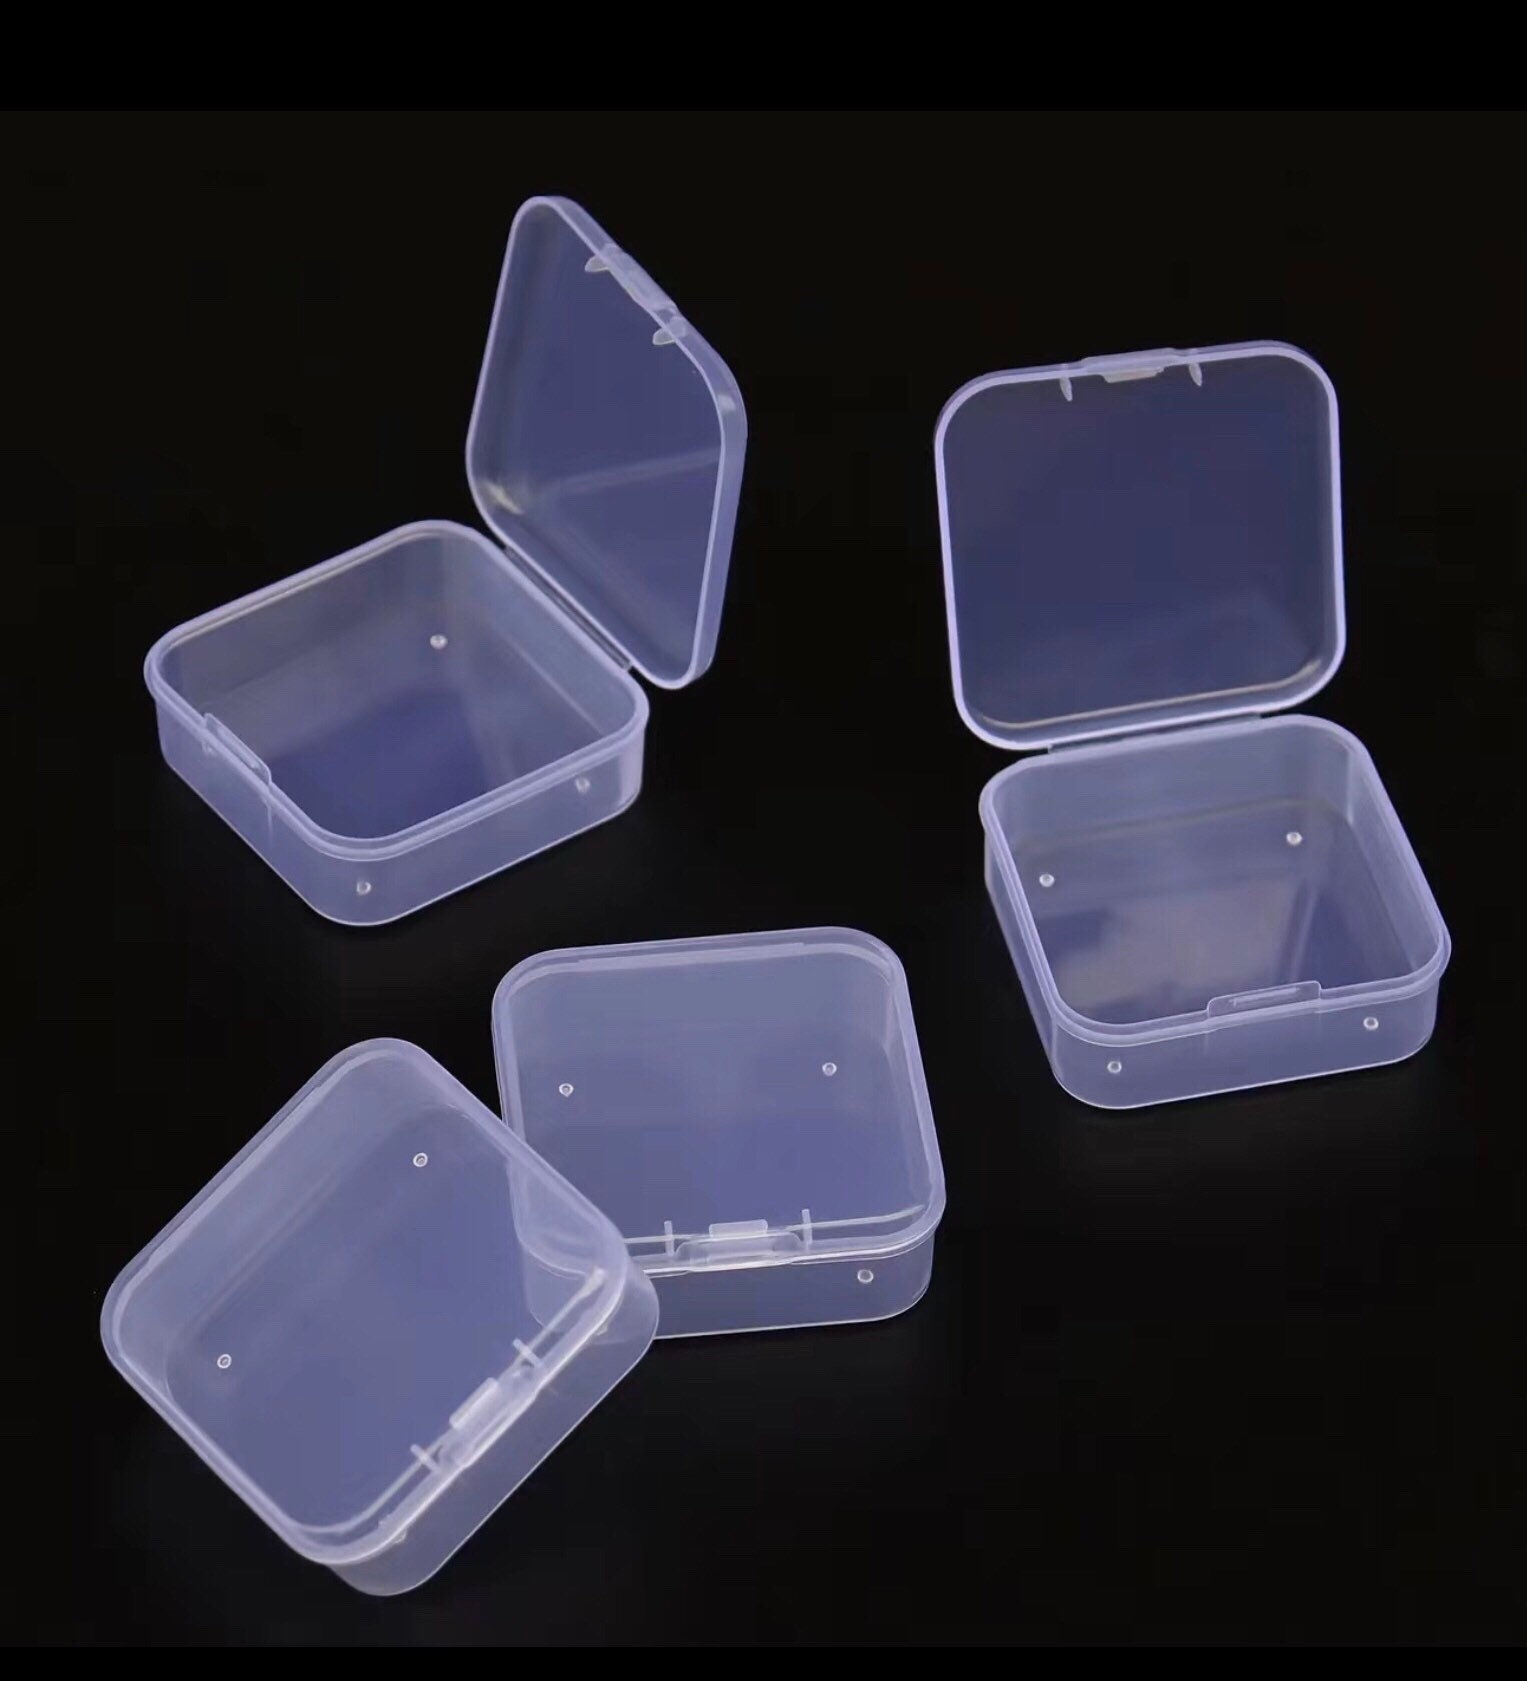 60 Small Plastic Boxes 1.75 X 1.75 Cm X 0.75 craft Organizer Plastic Box  Nail Jewelry Bead Storage Container US Seller Bx-246 -  Hong Kong